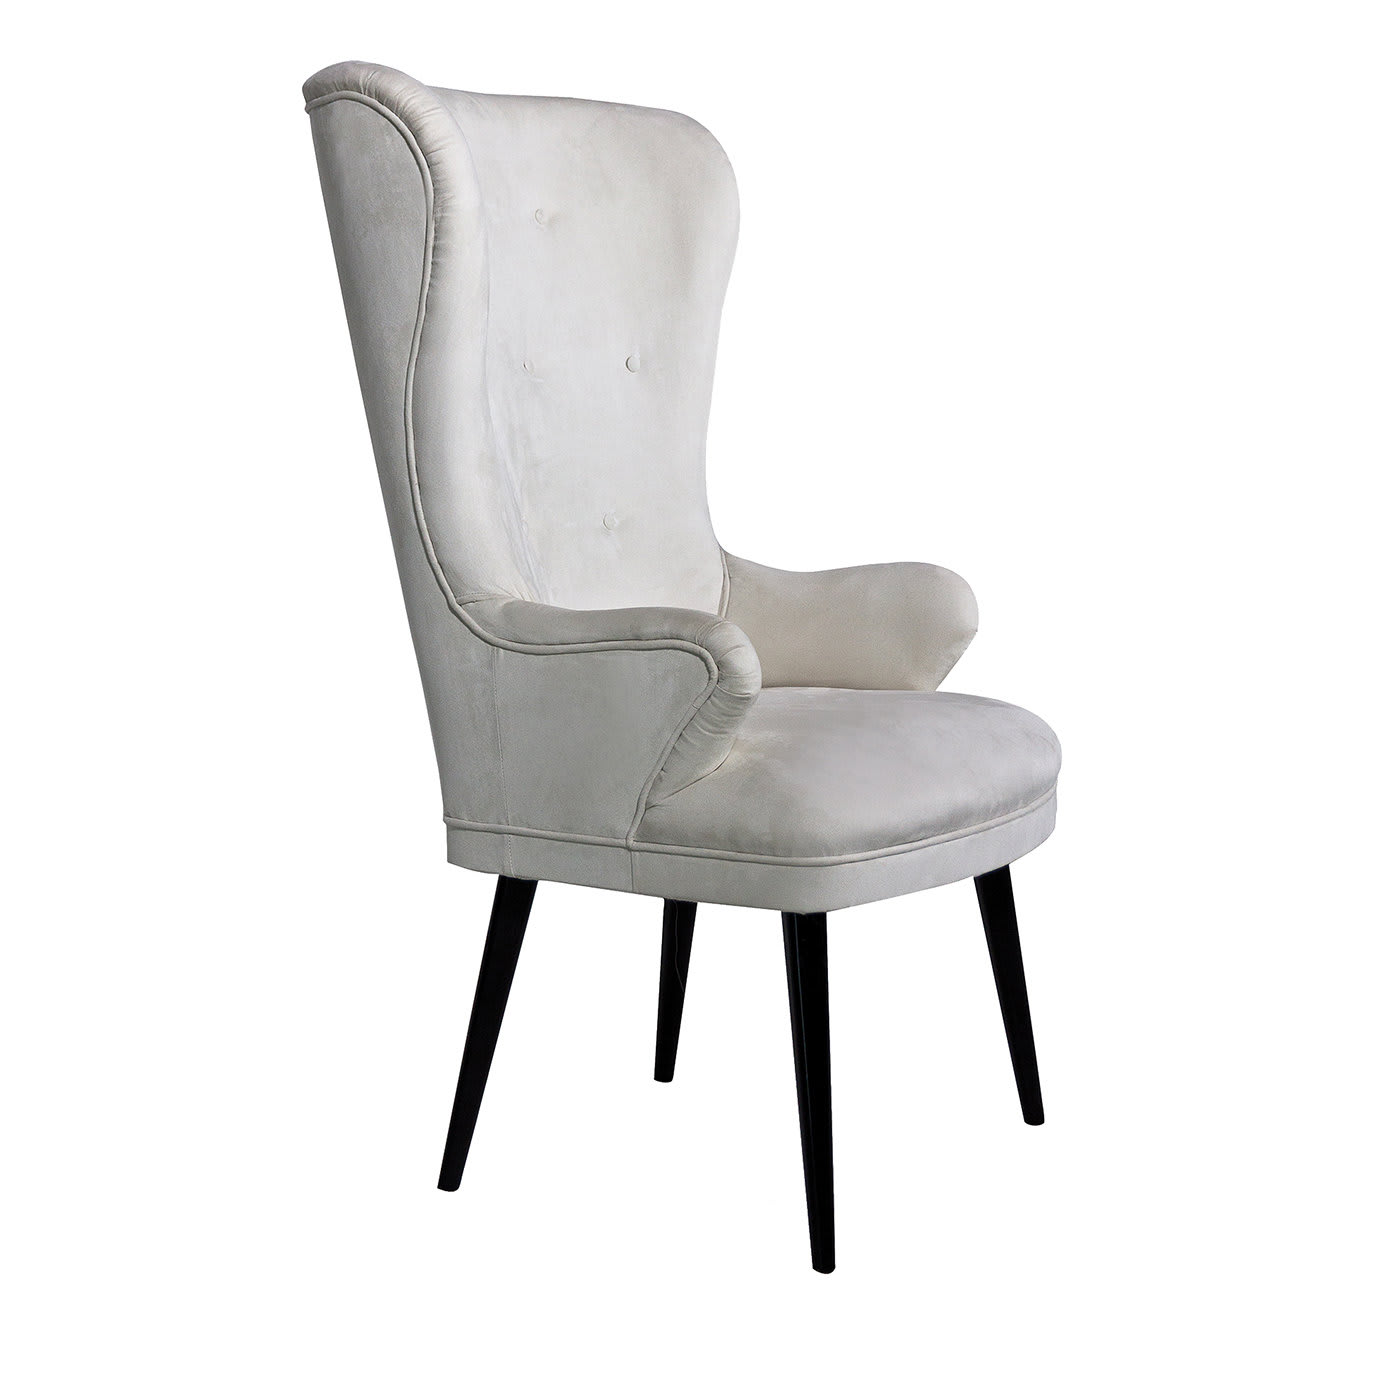 Colonial-Style Off-White Armchair - Palmobili